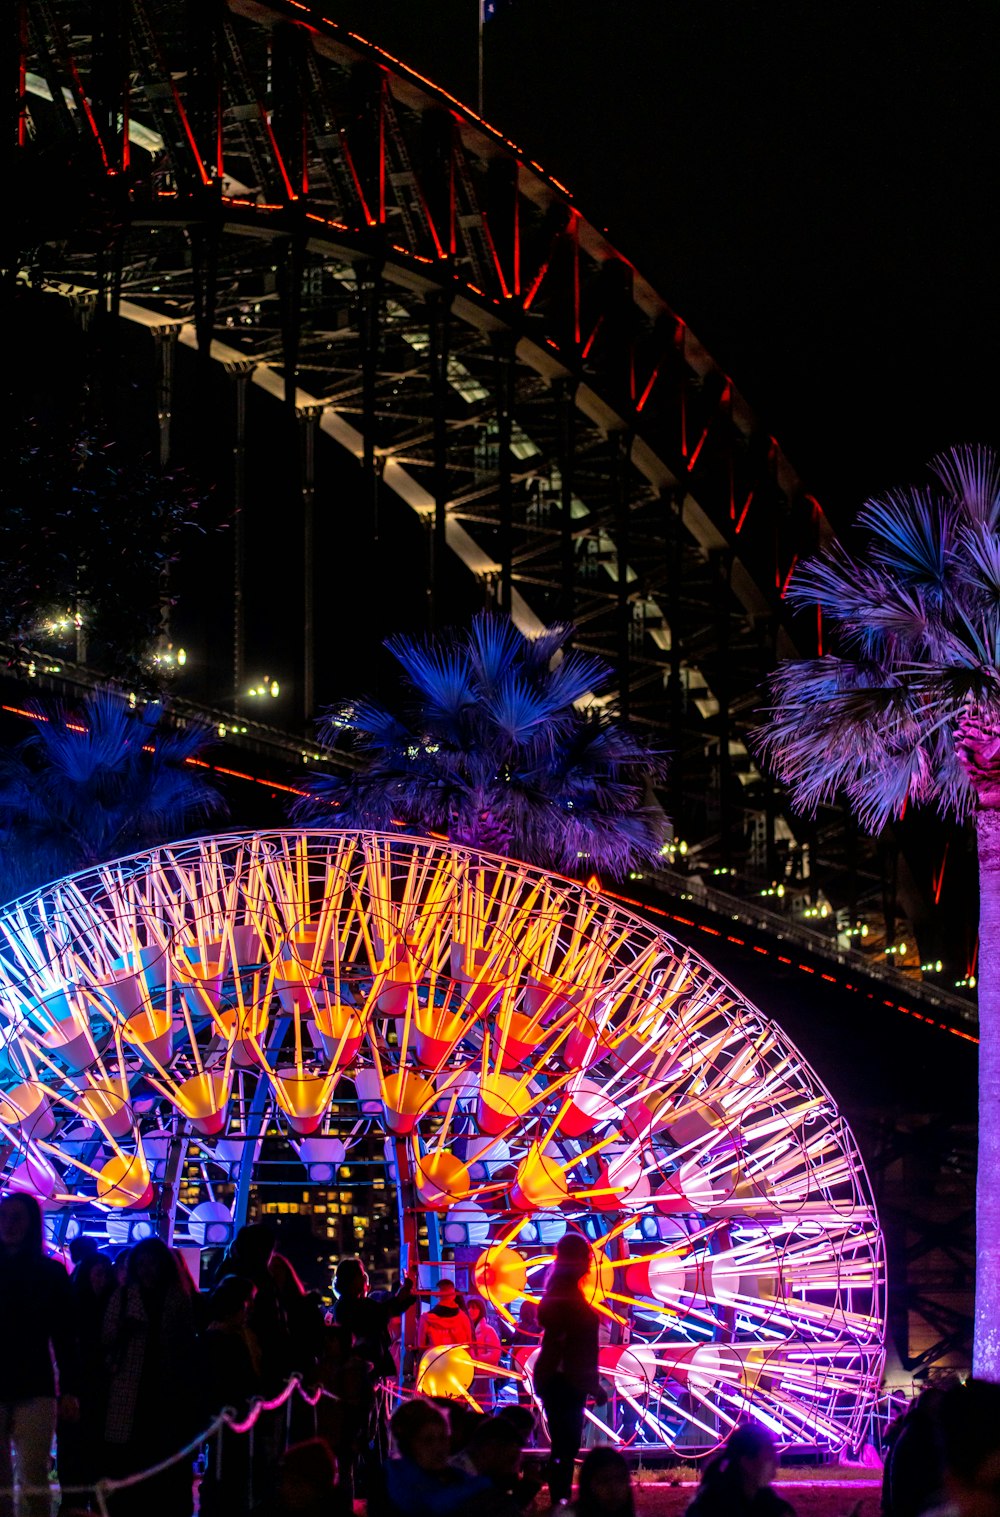 a large ferris wheel lit up at night